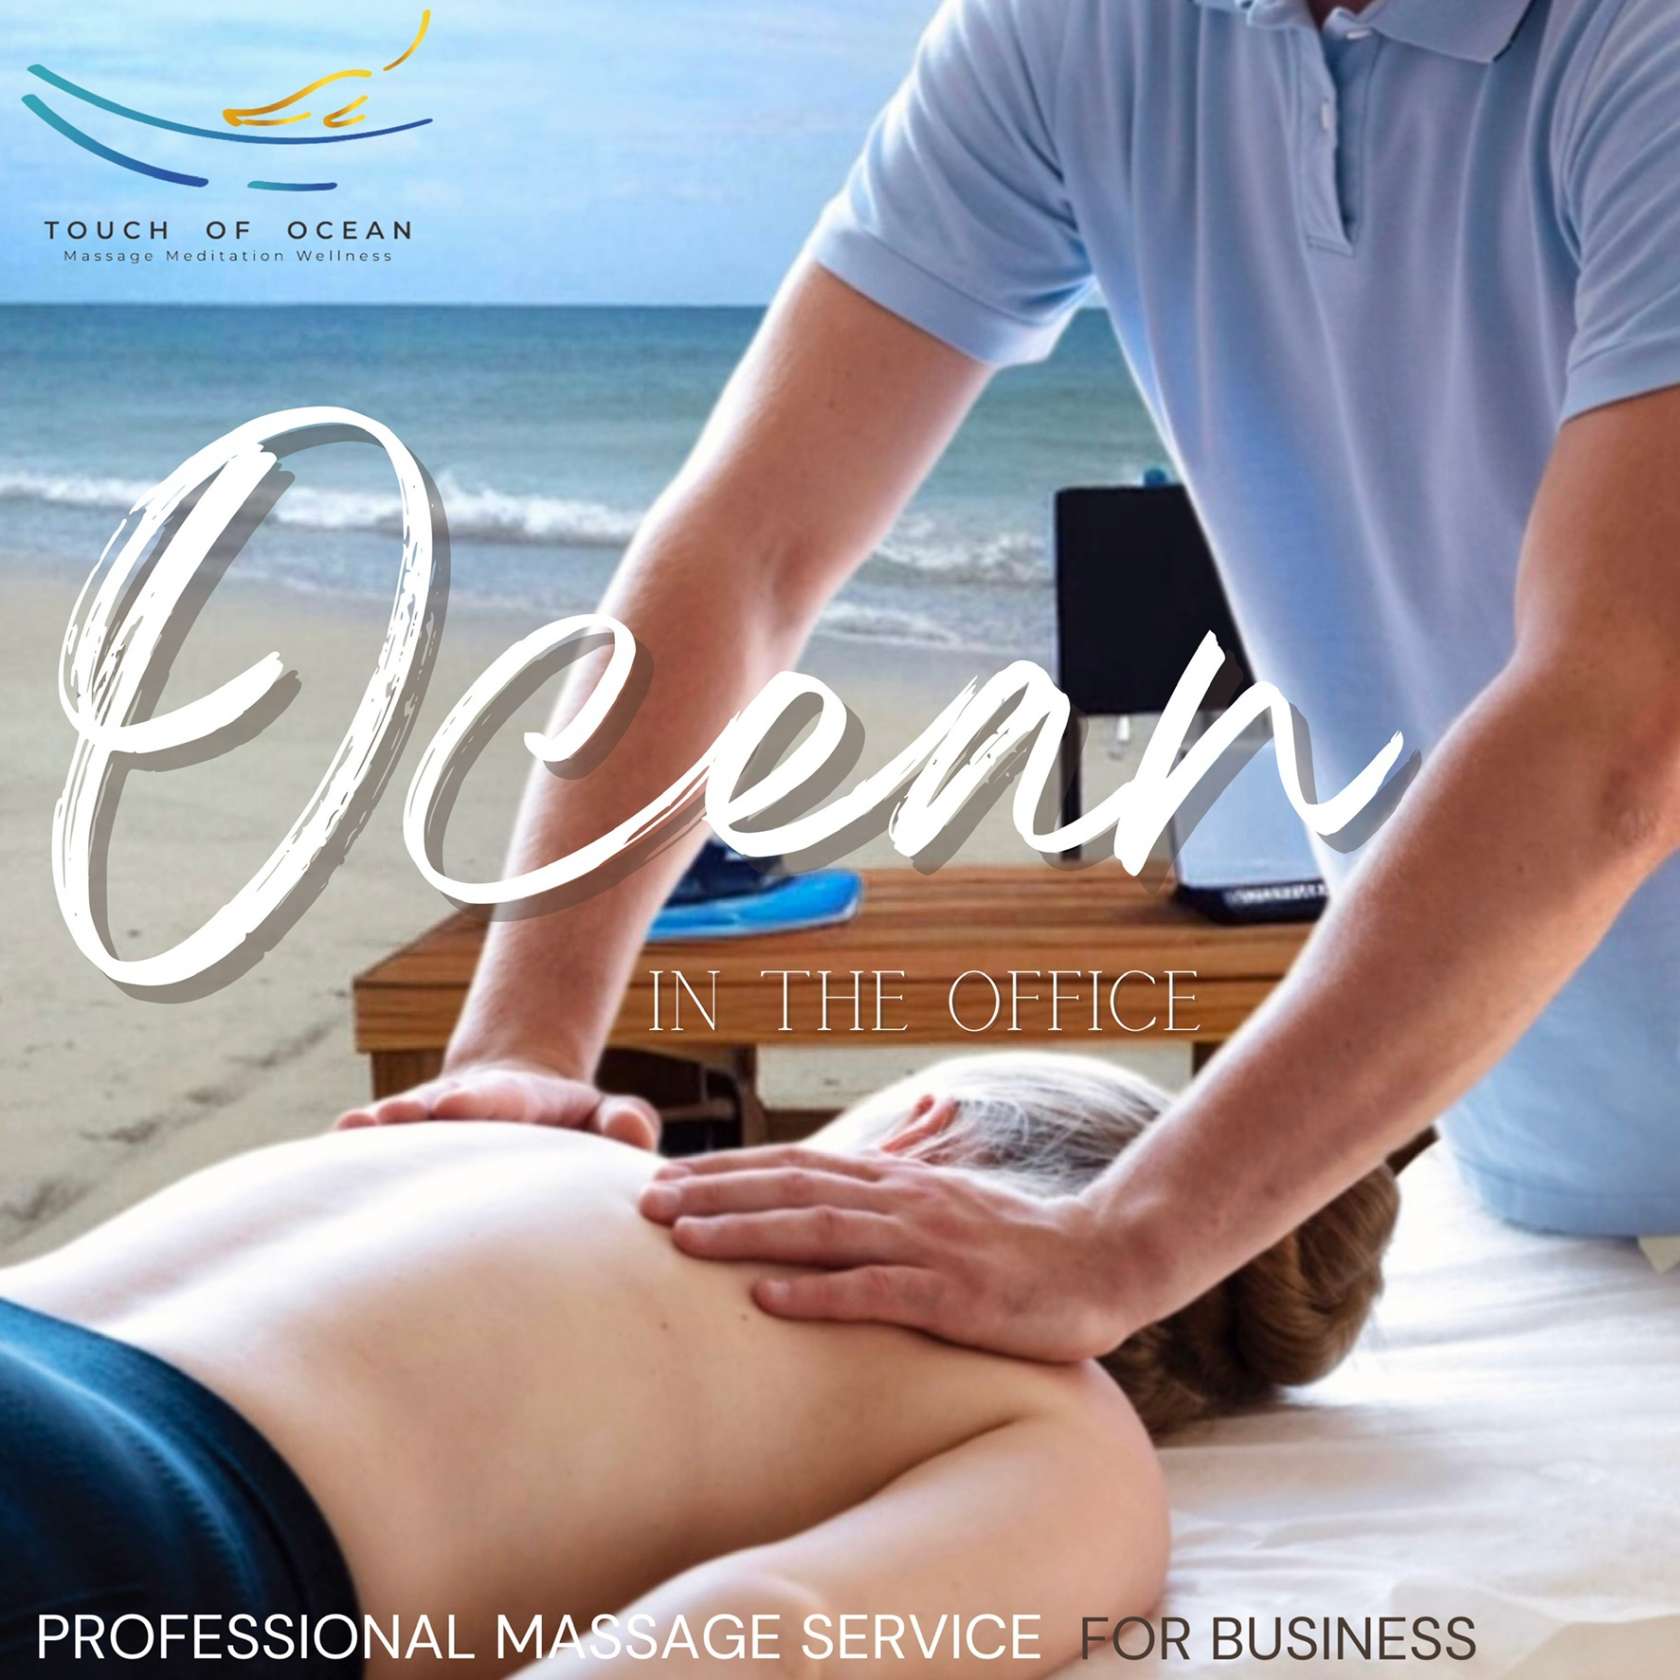 Mobile Massage For Business - Ocean in the office 